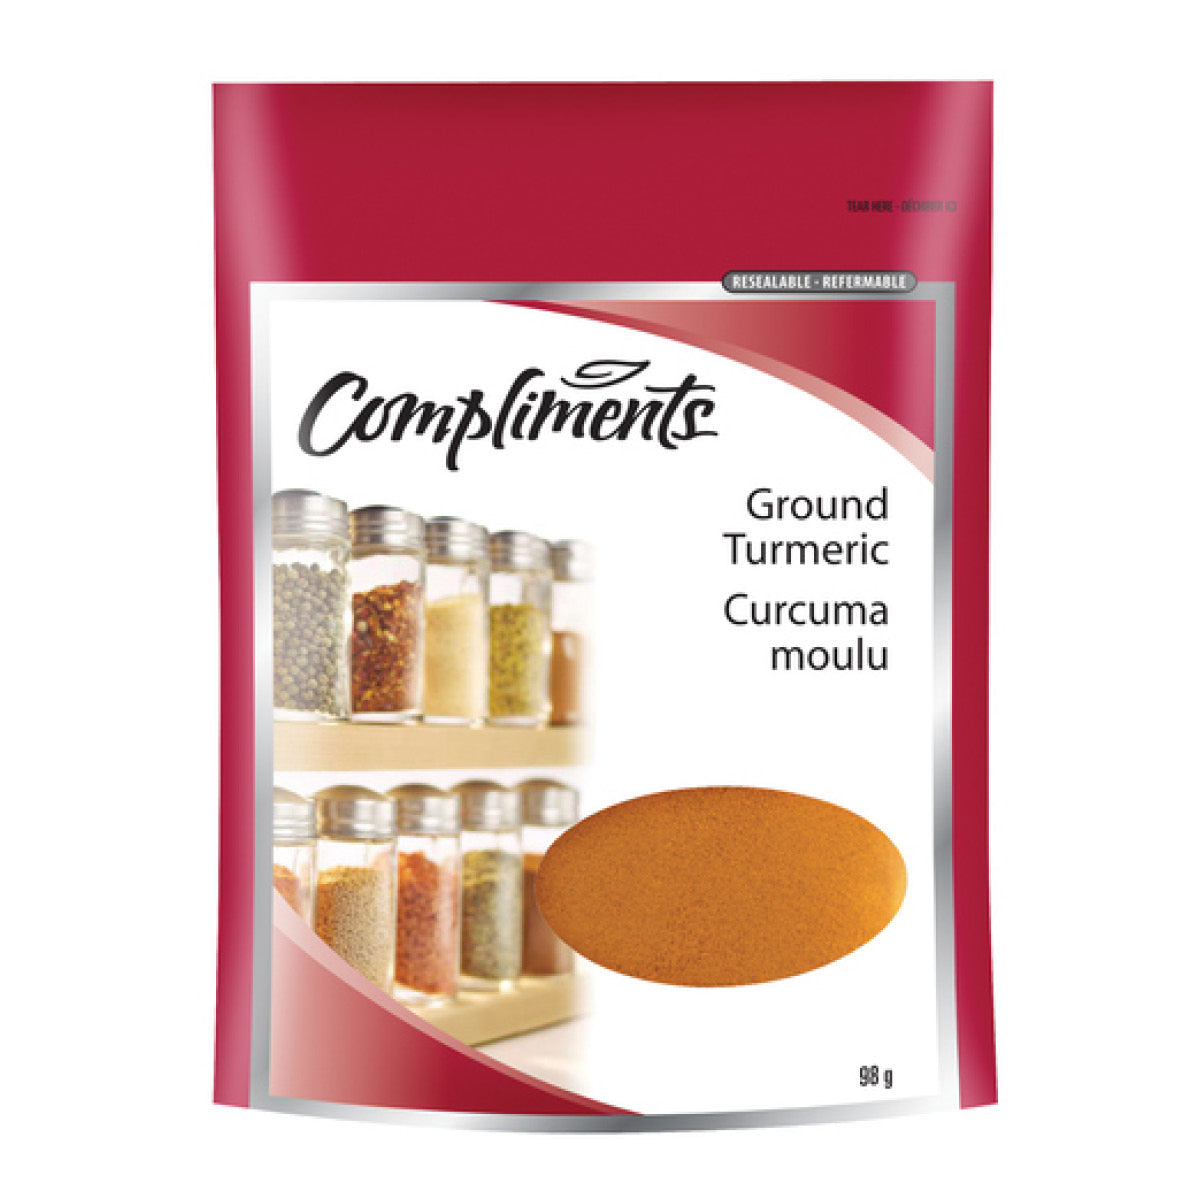 Compliments Ground Turmeric, 98G